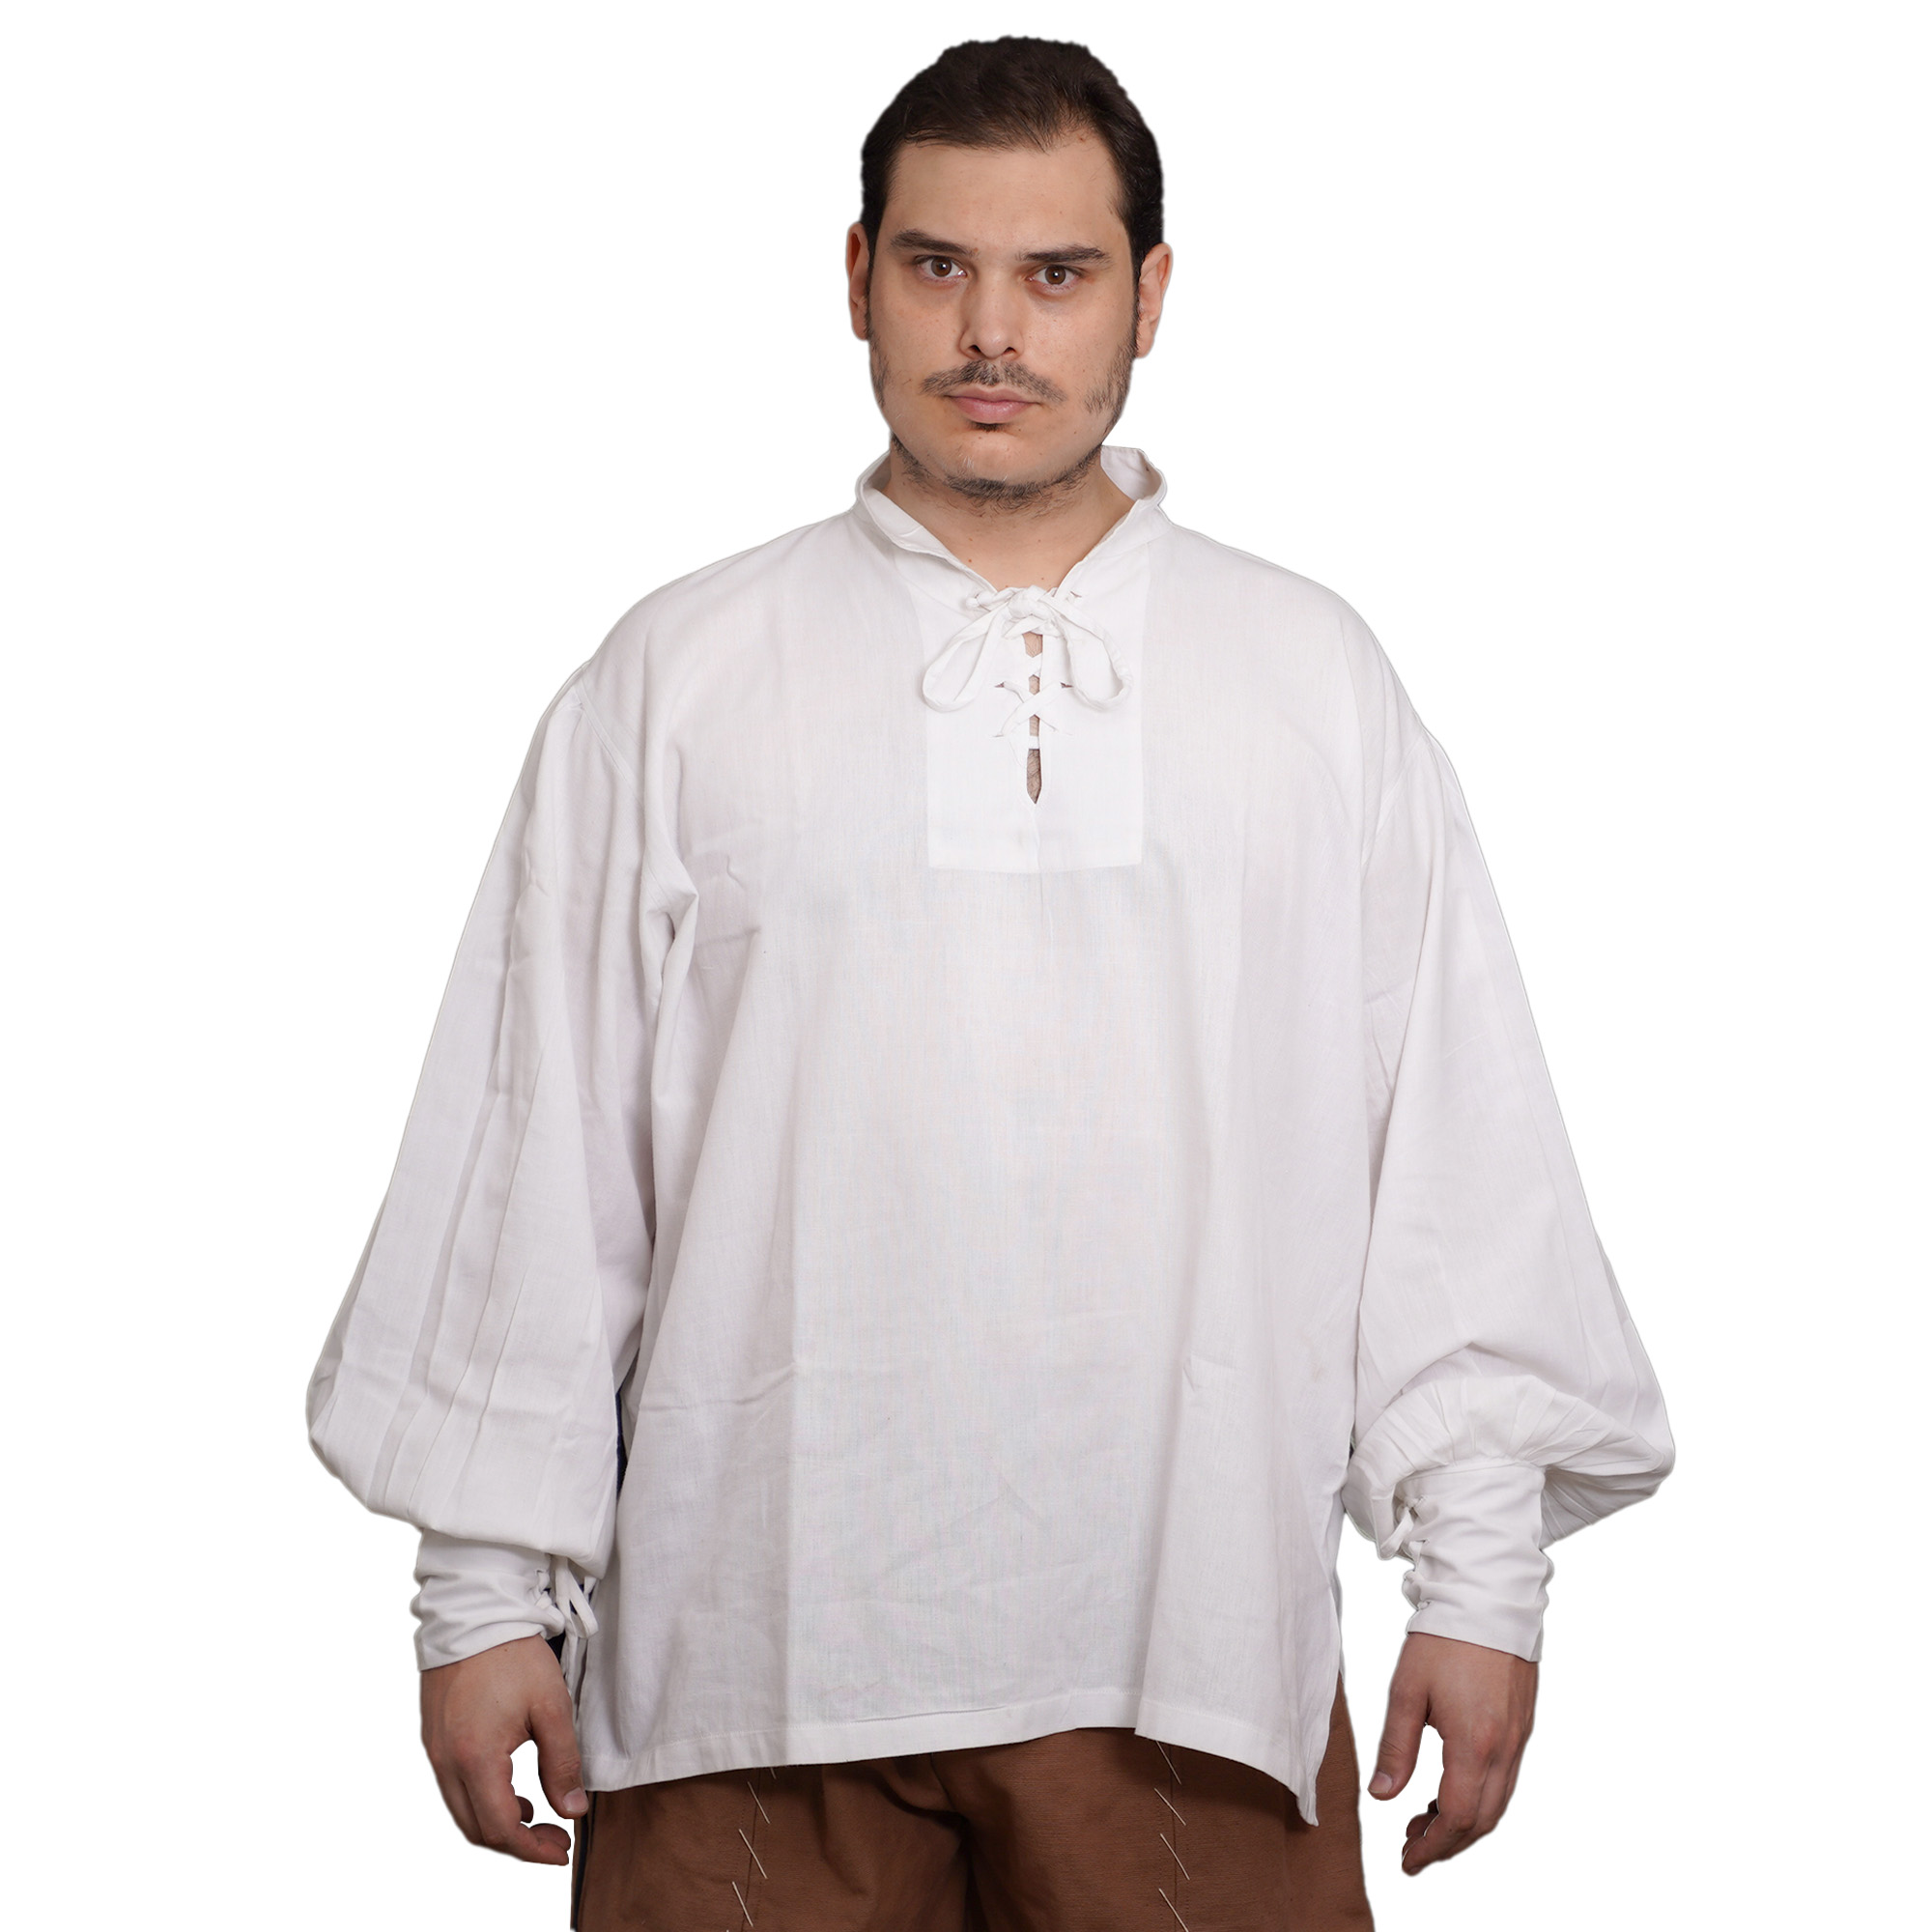 Classic Medieval Fantasy or Renaissance Pirate Shirt Handmade Light Cotton,  White and Black - Lord of Battles